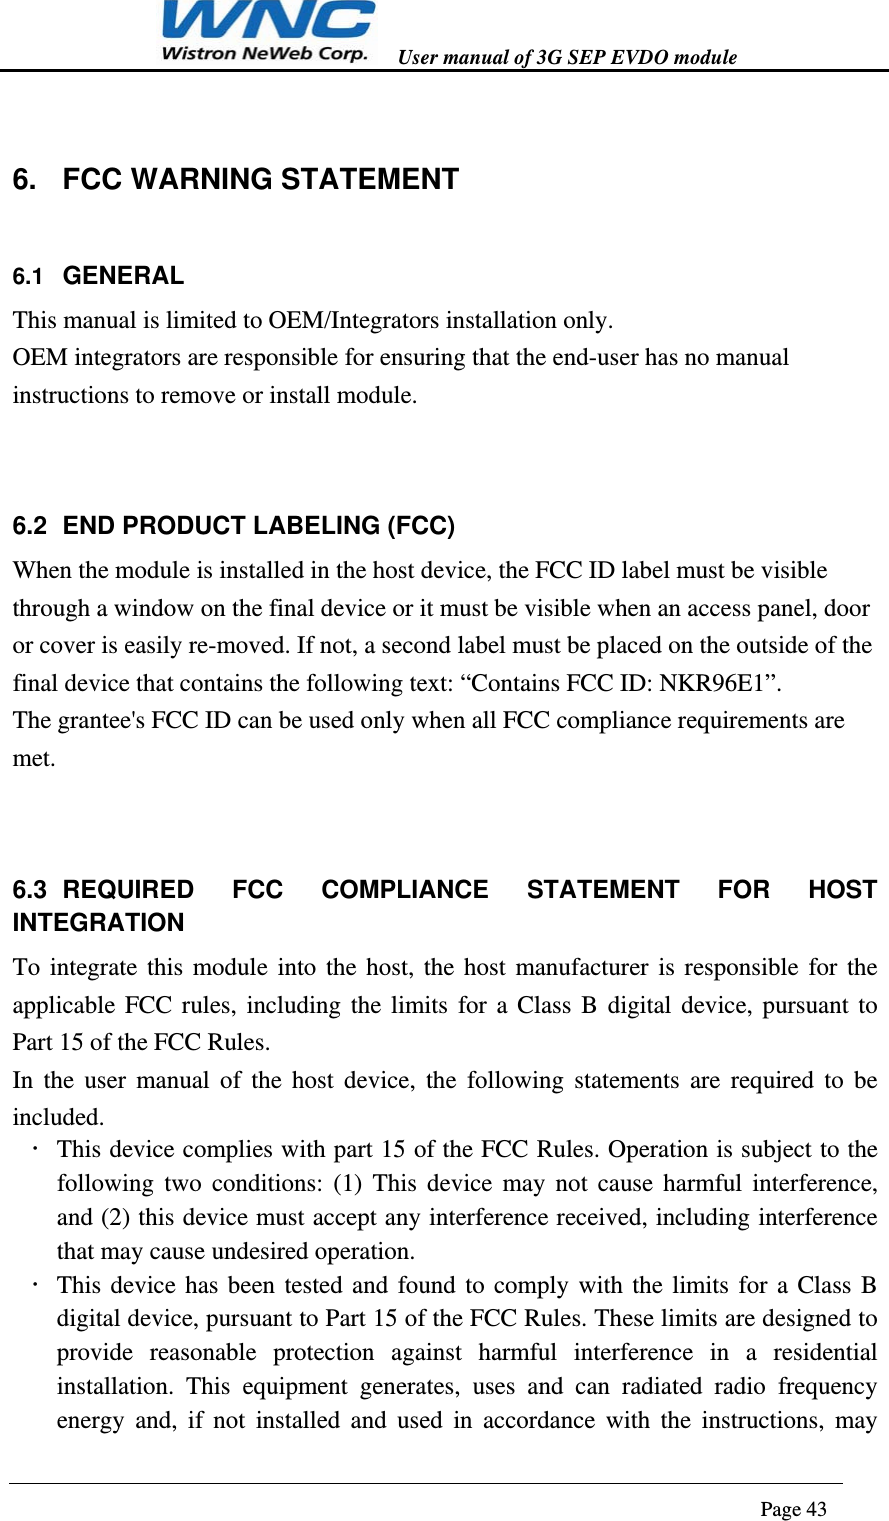   User manual of 3G SEP EVDO module                                                                      Page 43  6.  FCC WARNING STATEMENT 6.1  GENERAL This manual is limited to OEM/Integrators installation only.   OEM integrators are responsible for ensuring that the end-user has no manual instructions to remove or install module.  6.2  END PRODUCT LABELING (FCC) When the module is installed in the host device, the FCC ID label must be visible through a window on the final device or it must be visible when an access panel, door or cover is easily re-moved. If not, a second label must be placed on the outside of the final device that contains the following text: “Contains FCC ID: NKR96E1”. The grantee&apos;s FCC ID can be used only when all FCC compliance requirements are met.    6.3 REQUIRED FCC COMPLIANCE STATEMENT FOR HOST INTEGRATION To integrate this module into the host, the host manufacturer is responsible for the applicable FCC rules, including the limits for a Class B digital device, pursuant to Part 15 of the FCC Rules. In the user manual of the host device, the following statements are required to be included.  This device complies with part 15 of the FCC Rules. Operation is subject to the following two conditions: (1) This device may not cause harmful interference, and (2) this device must accept any interference received, including interference that may cause undesired operation.  This device has been tested and found to comply with the limits for a Class B digital device, pursuant to Part 15 of the FCC Rules. These limits are designed to provide reasonable protection against harmful interference in a residential installation. This equipment generates, uses and can radiated radio frequency energy and, if not installed and used in accordance with the instructions, may 